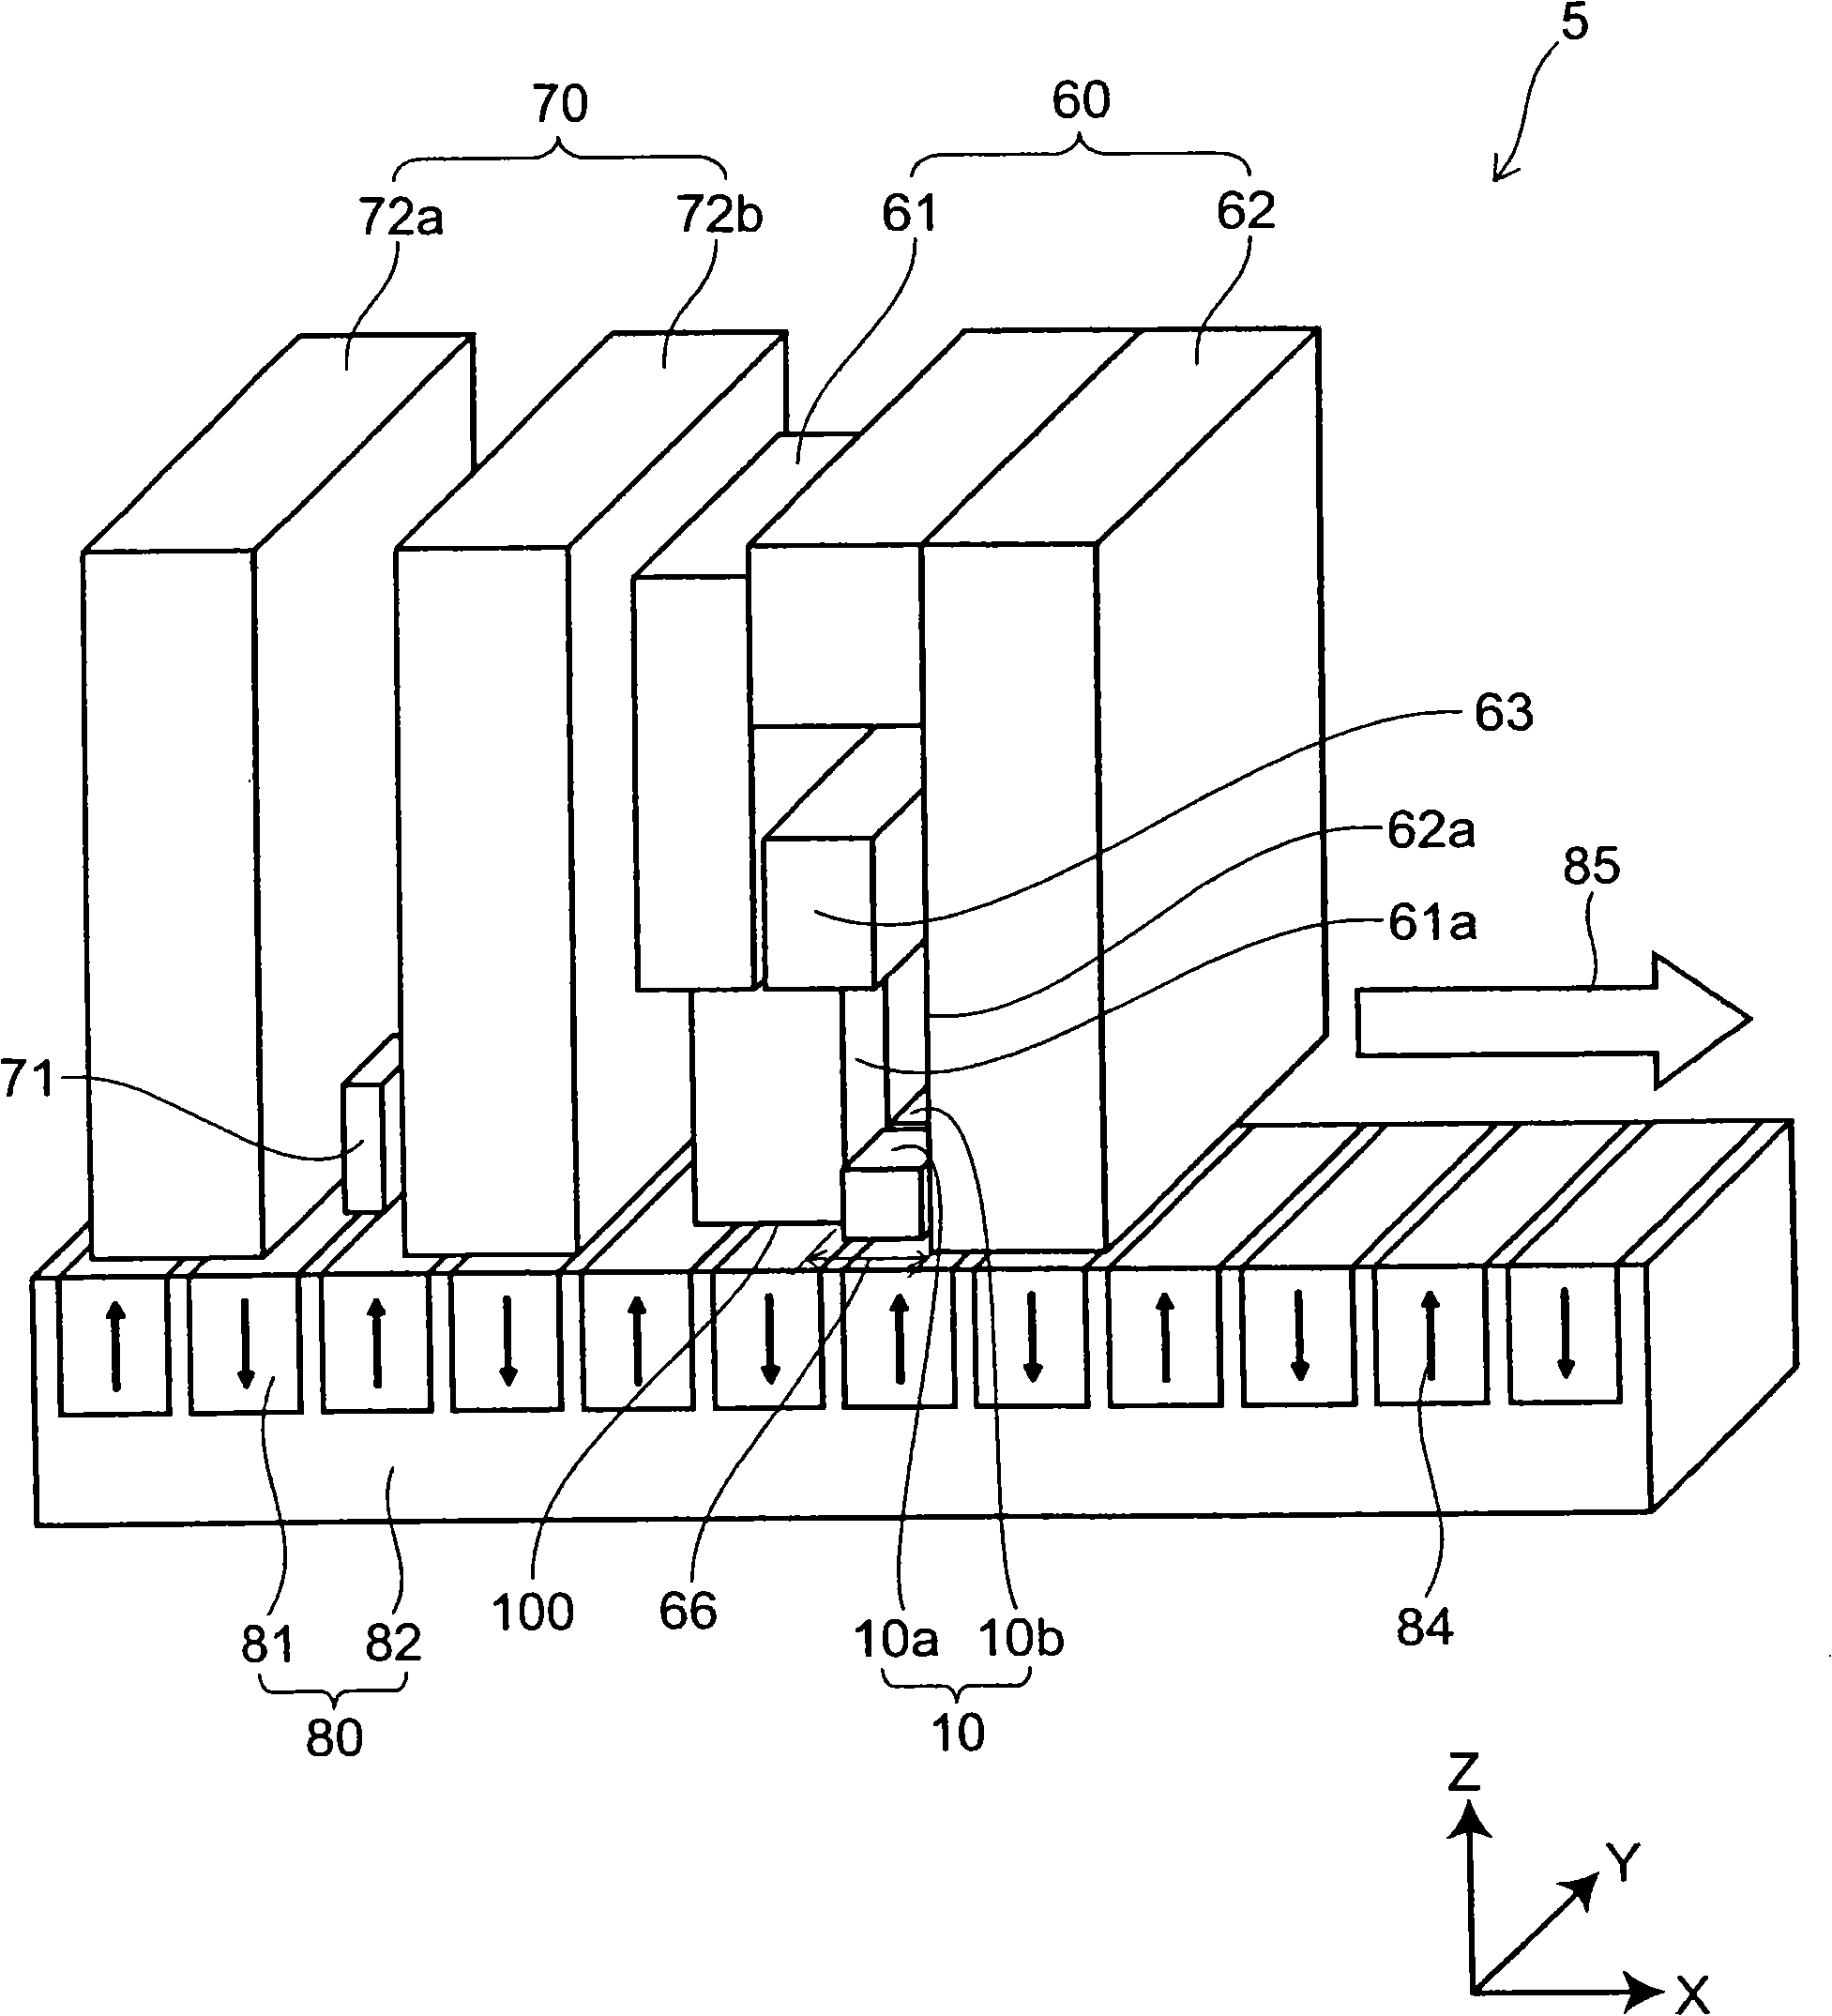 Magnetic recording head and magnetic recording apparatus